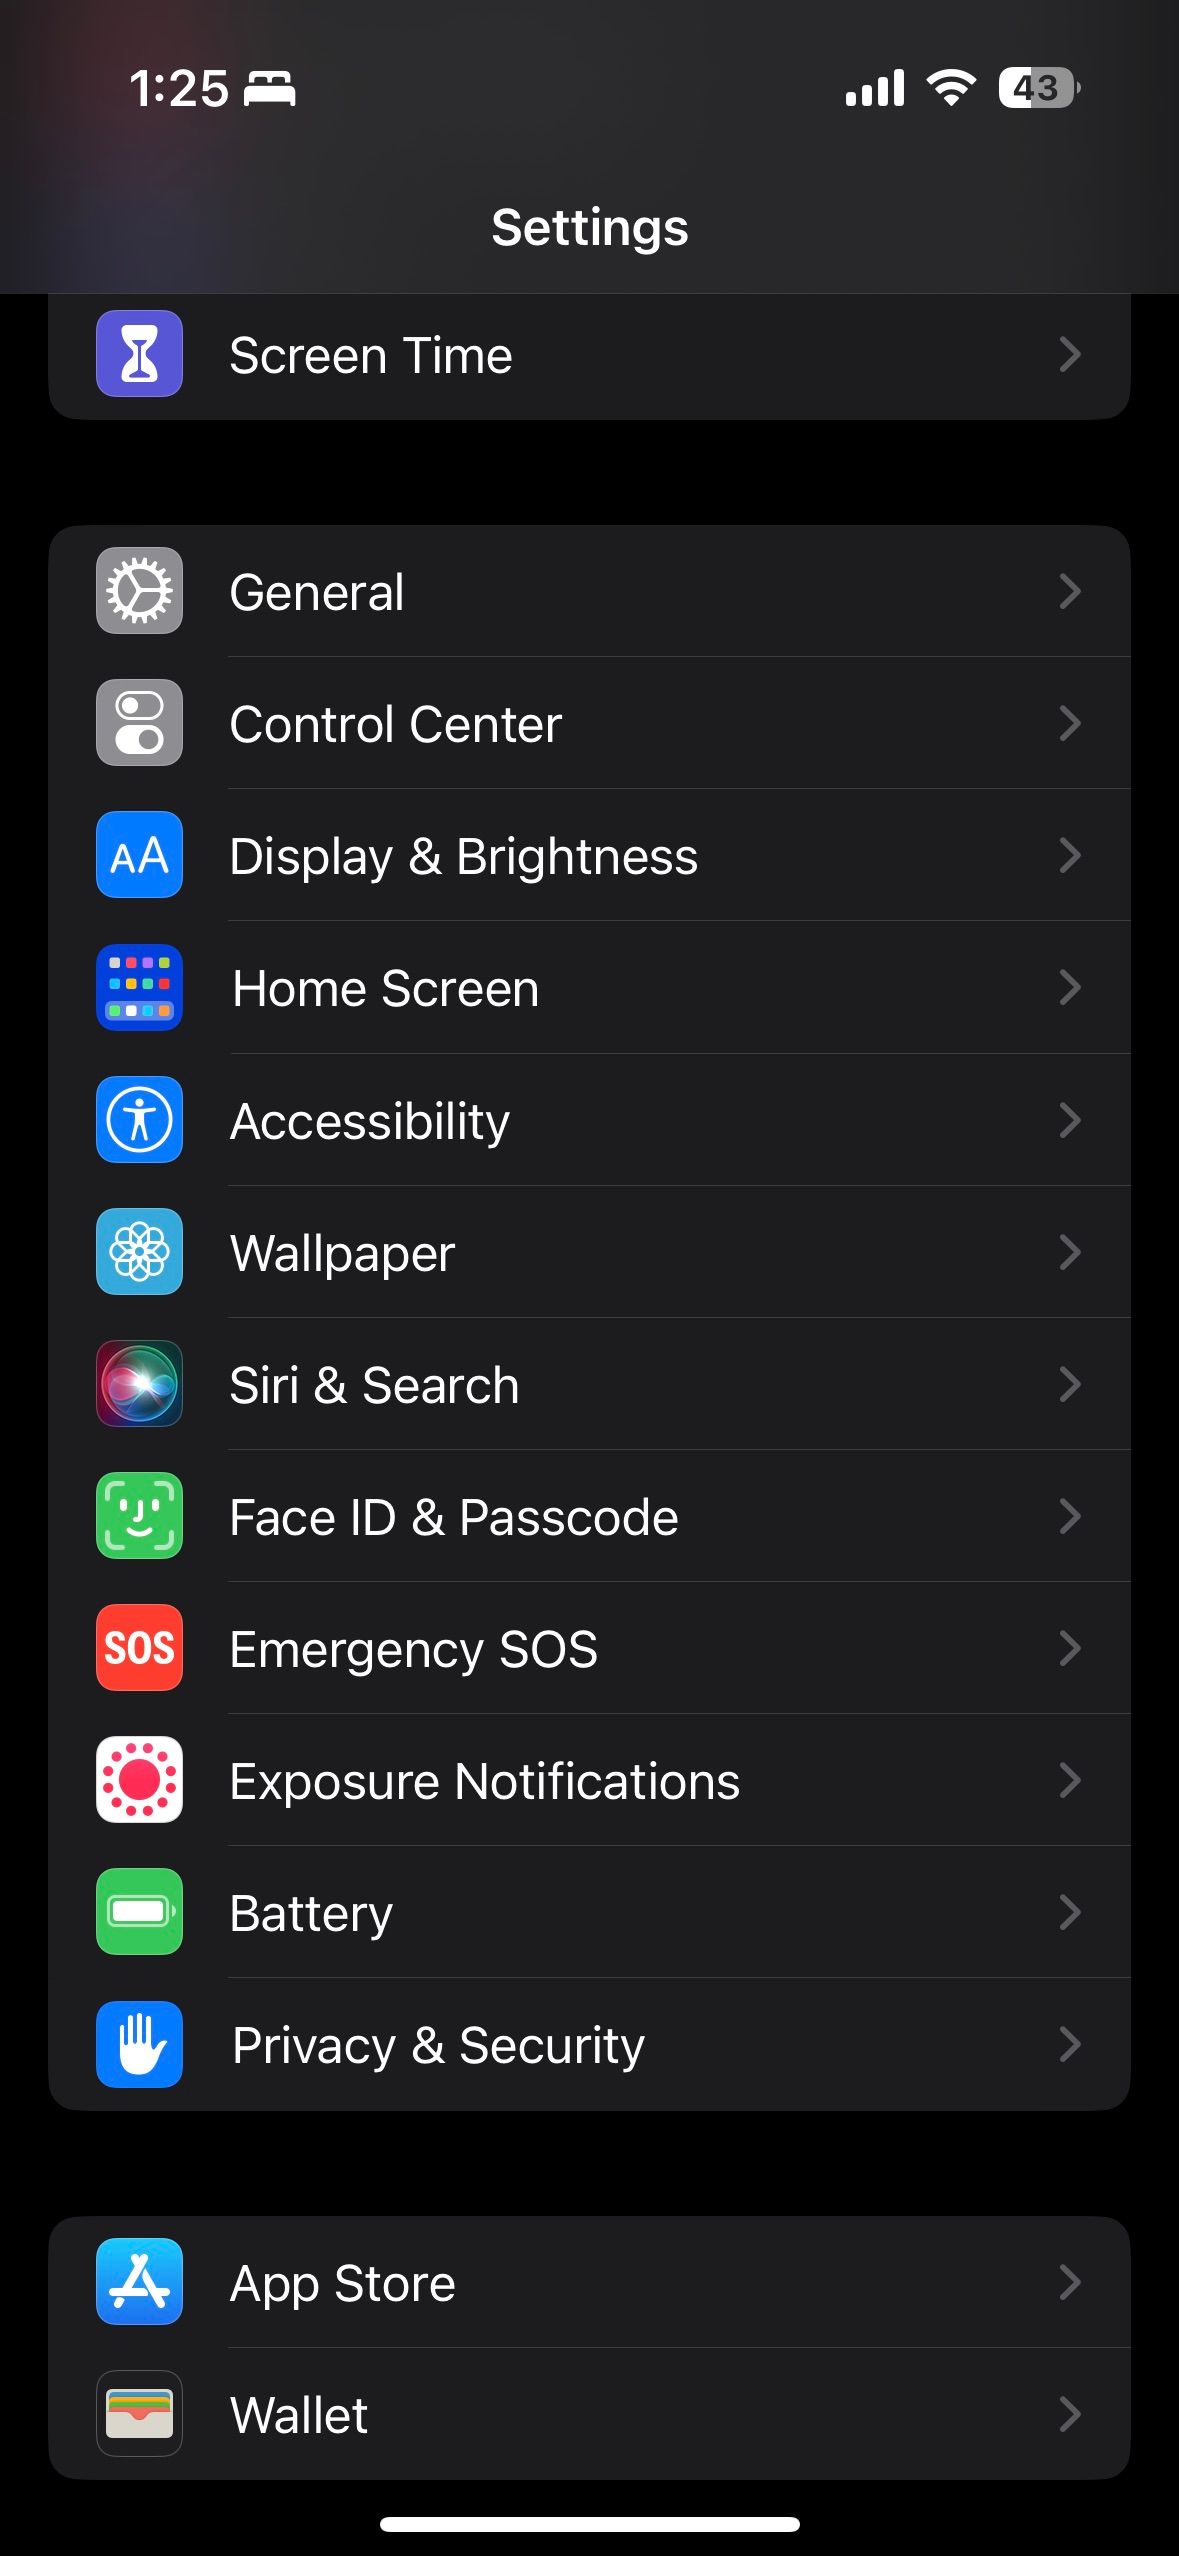 Settings App on iOS 16 showing the display & brightness option for Always On Display settings